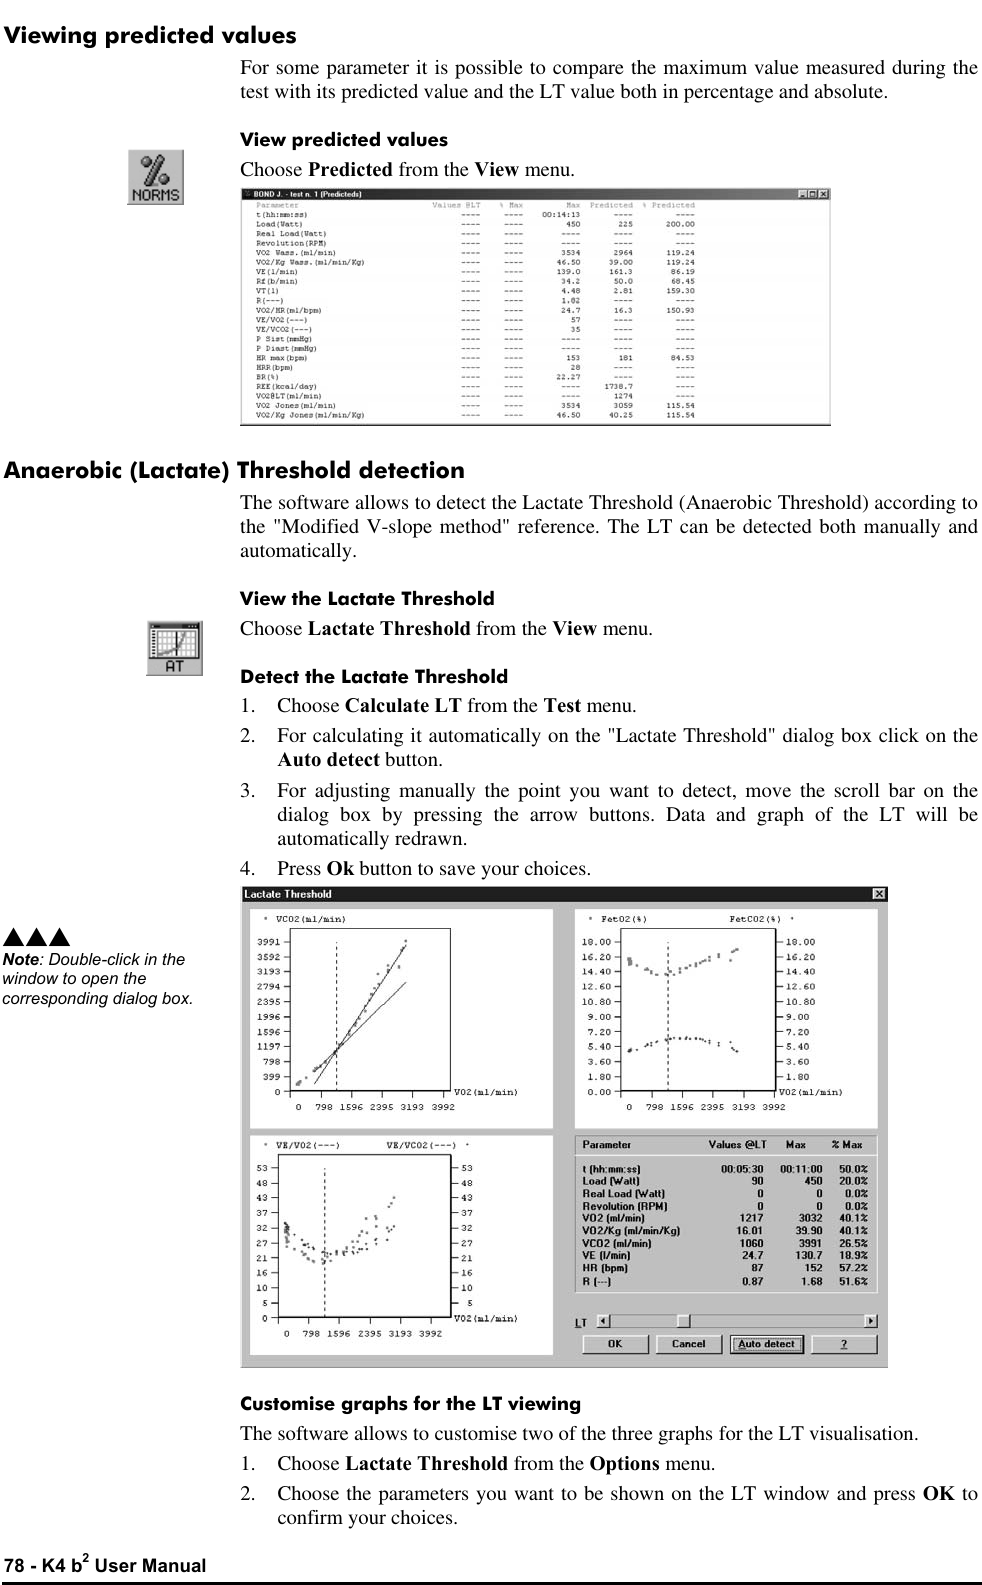  78 - K4 b2 User Manual Viewing predicted values For some parameter it is possible to compare the maximum value measured during the test with its predicted value and the LT value both in percentage and absolute. View predicted values Choose Predicted from the View menu.  Anaerobic (Lactate) Threshold detection The software allows to detect the Lactate Threshold (Anaerobic Threshold) according to the &quot;Modified V-slope method&quot; reference. The LT can be detected both manually and automatically. View the Lactate Threshold Choose Lactate Threshold from the View menu. Detect the Lactate Threshold 1.  Choose Calculate LT from the Test menu. 2. For calculating it automatically on the &quot;Lactate Threshold&quot; dialog box click on the Auto detect button. 3. For adjusting manually the point you want to detect, move the scroll bar on the dialog box by pressing the arrow buttons. Data and graph of the LT will be automatically redrawn. 4. Press Ok button to save your choices.  Customise graphs for the LT viewing The software allows to customise two of the three graphs for the LT visualisation. 1.  Choose Lactate Threshold from the Options menu. 2. Choose the parameters you want to be shown on the LT window and press OK to confirm your choices. sss Note: Double-click in the window to open the corresponding dialog box. 